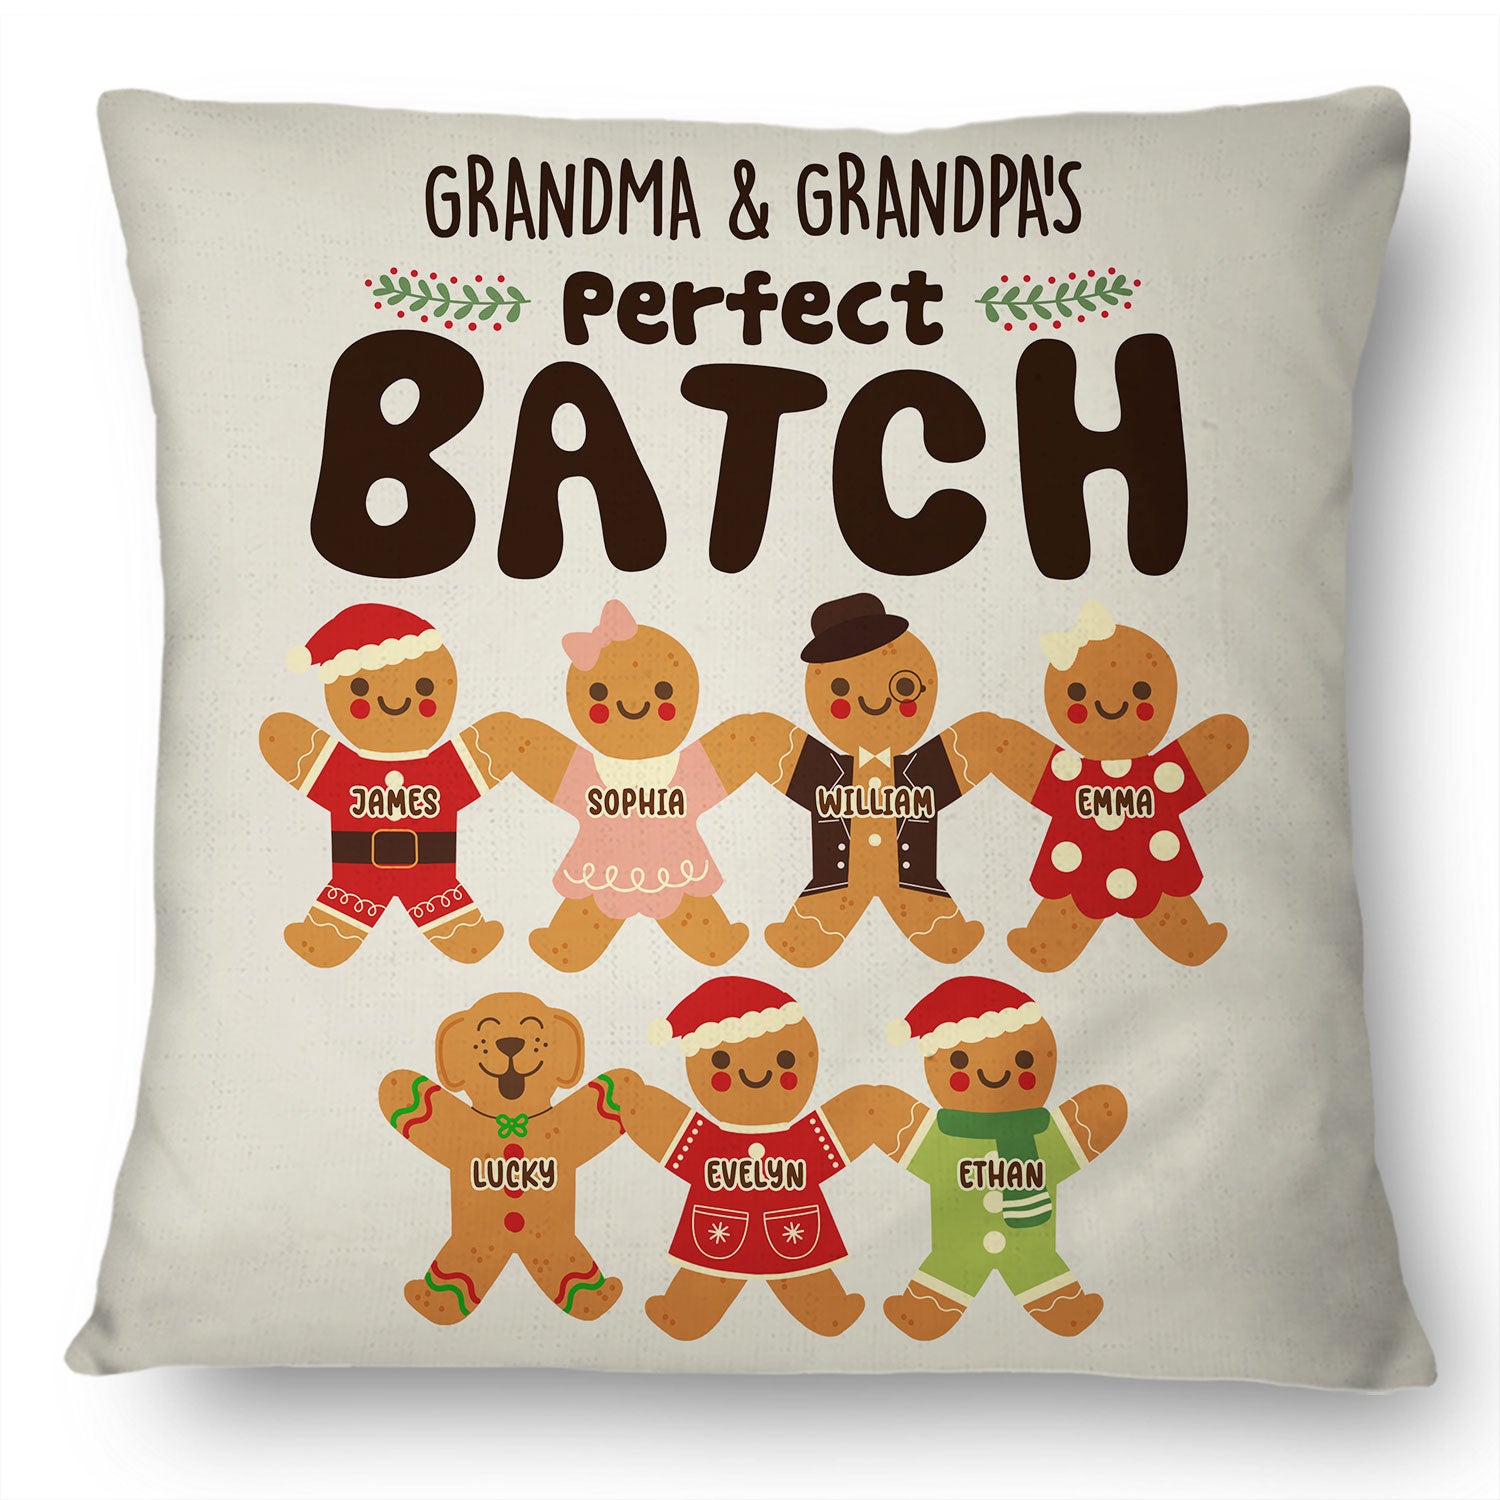 Grandma Grandpa Mom Dad Perfect Patch - Gift For Mom, Dad, Grandparents - Personalized Pillow